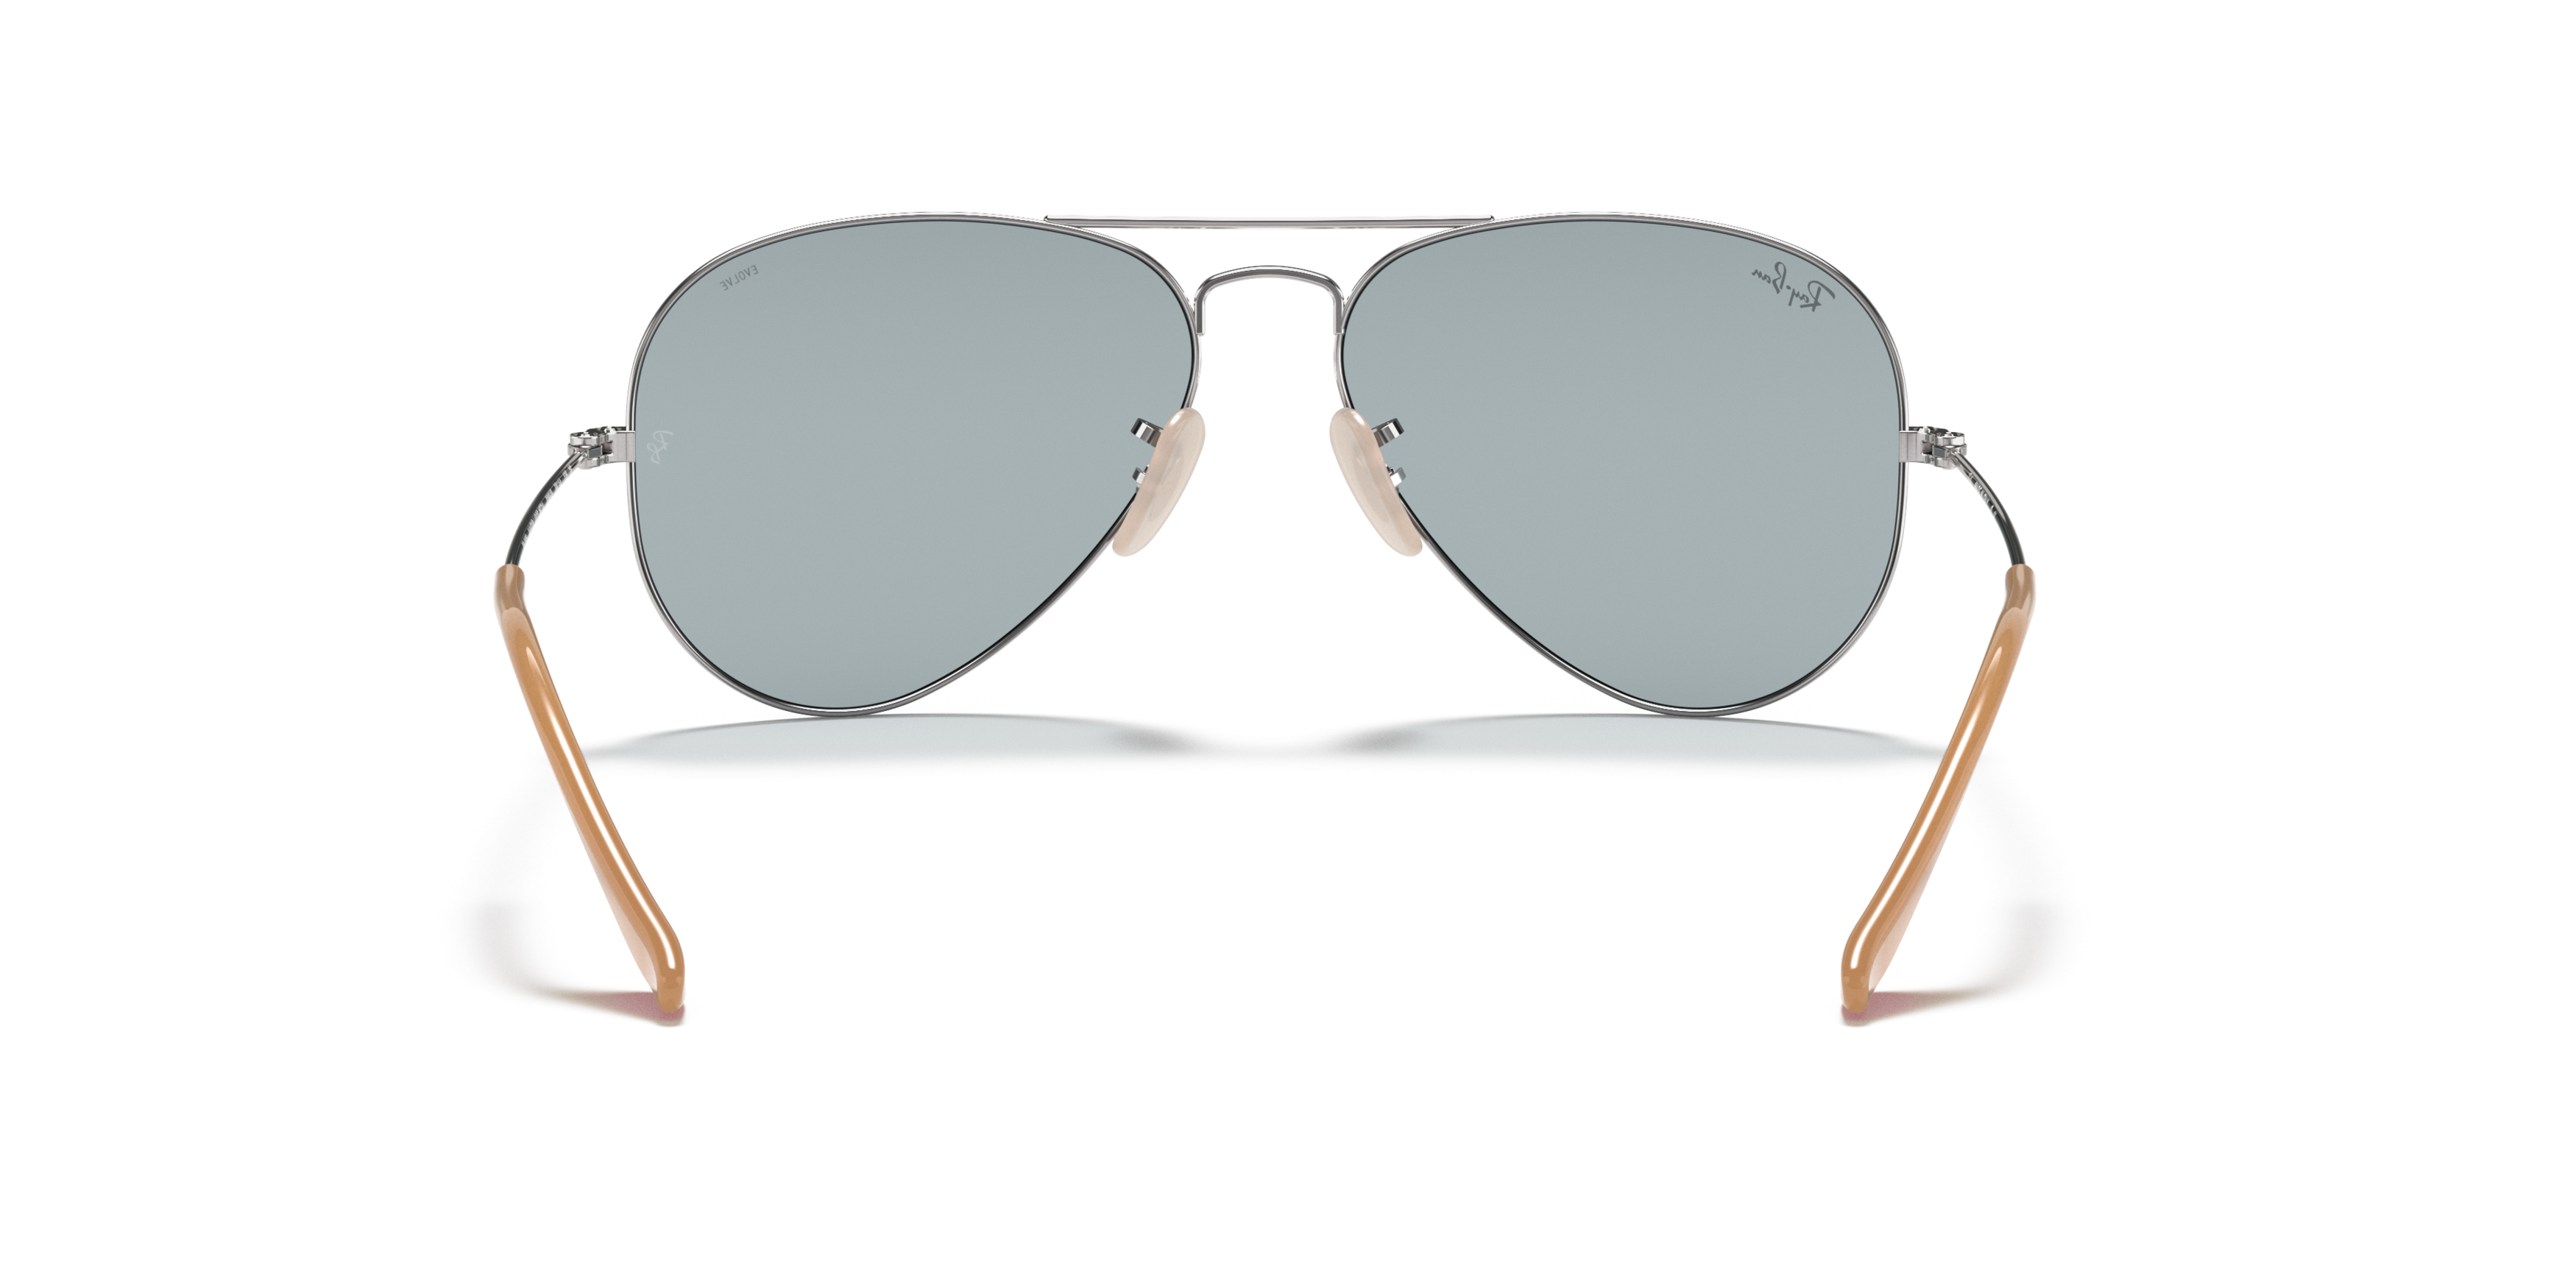 [products.image.detail02] Ray-Ban Aviator Washed Evolve RB3025 9065I5